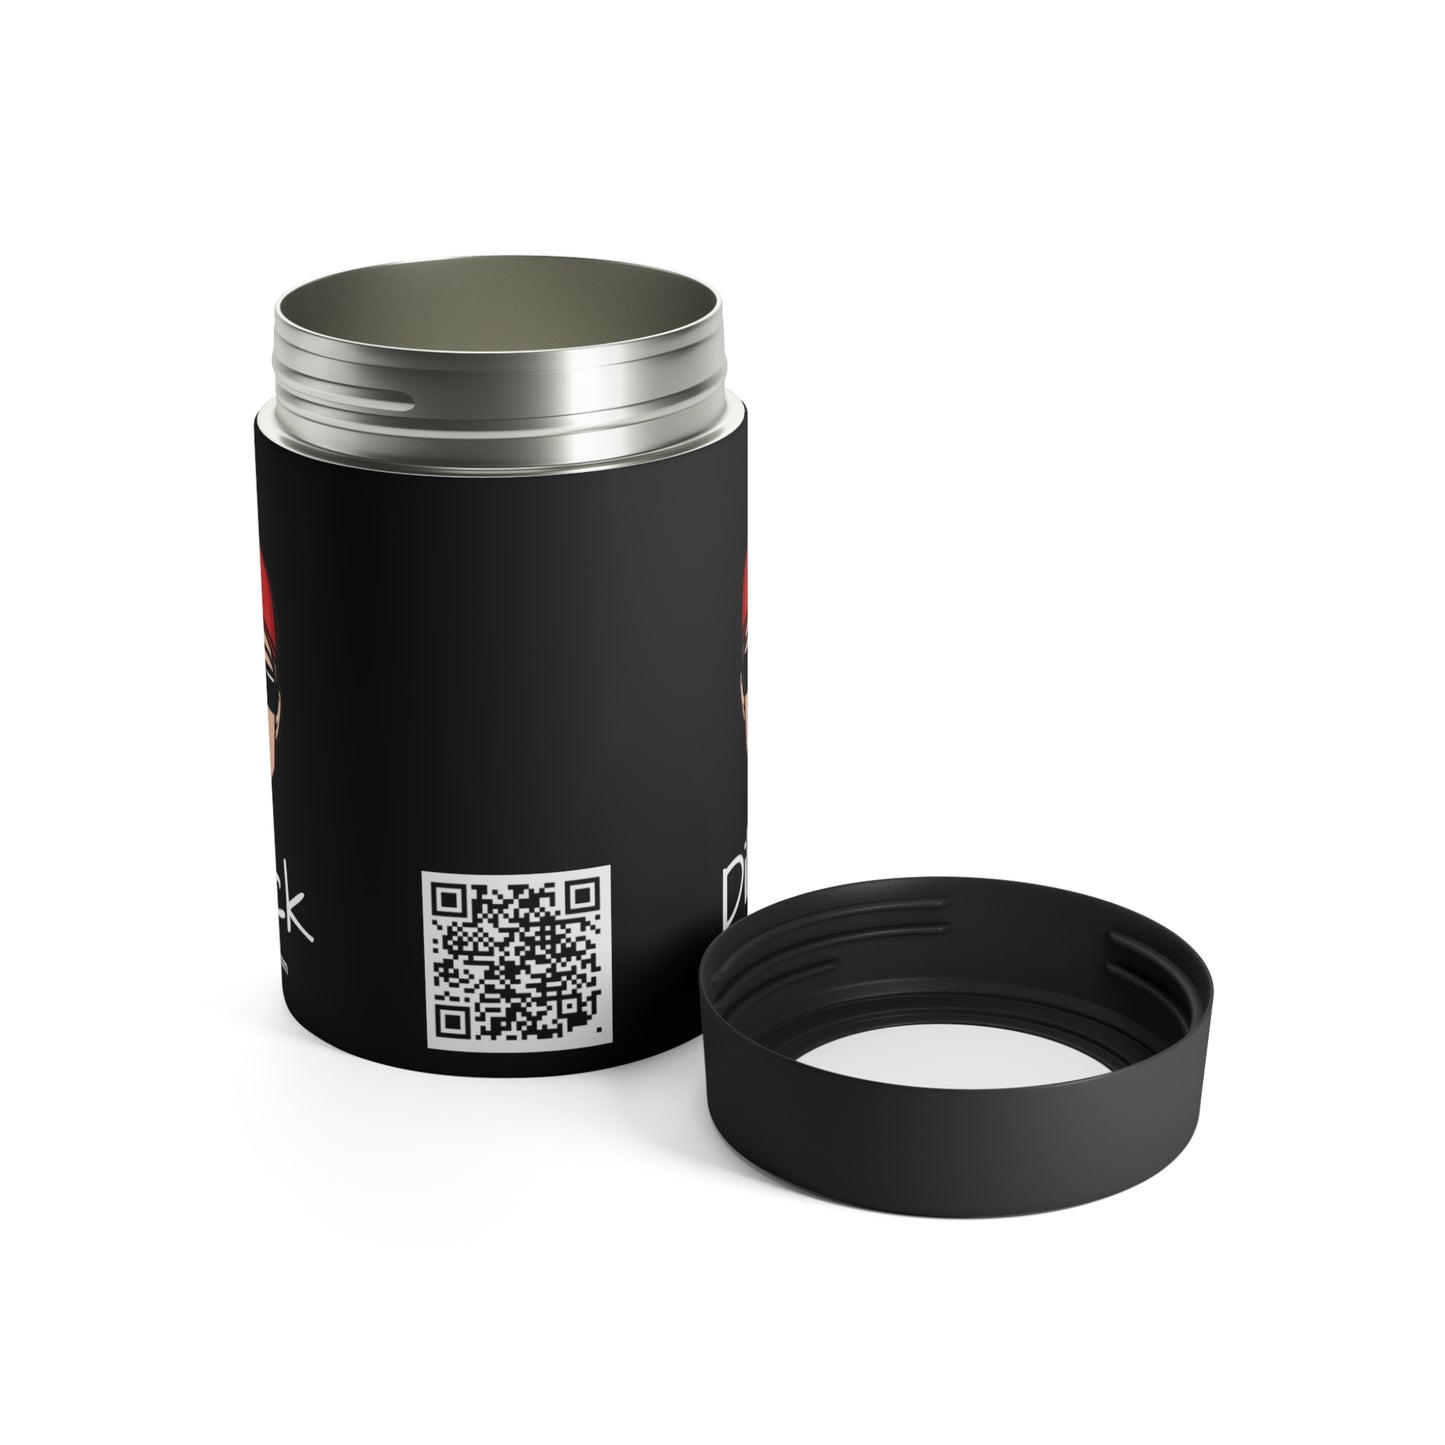 Dibick One Can Holder